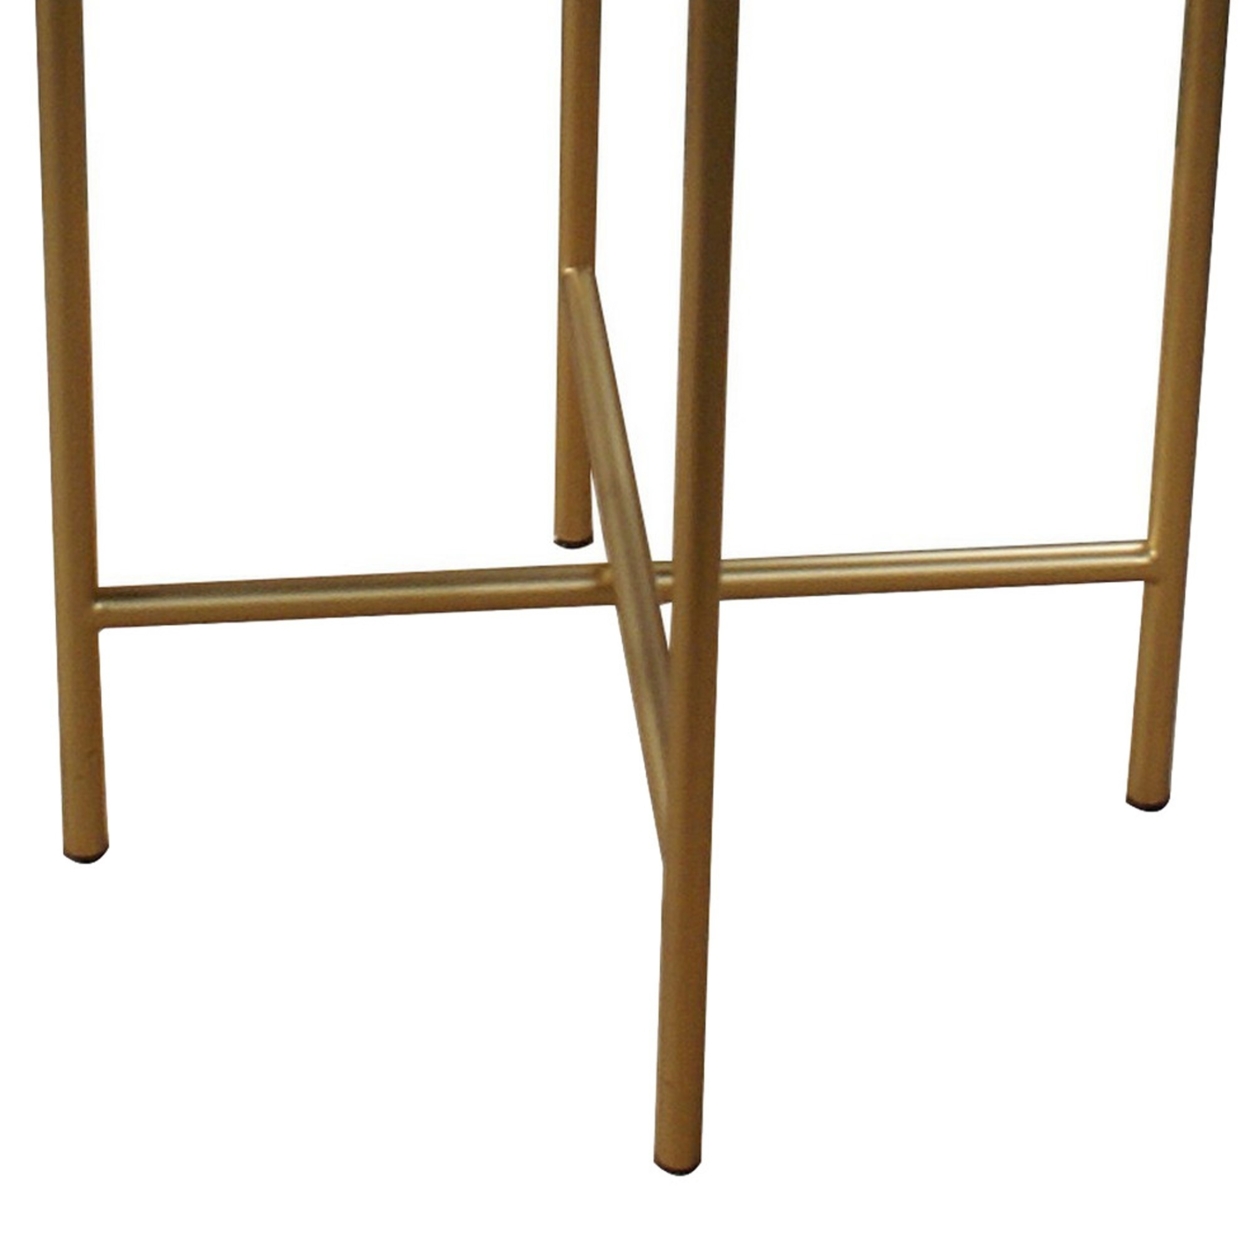 End Table With Ceramic Top And Metal Frame, White And Gold- Saltoro Sherpi